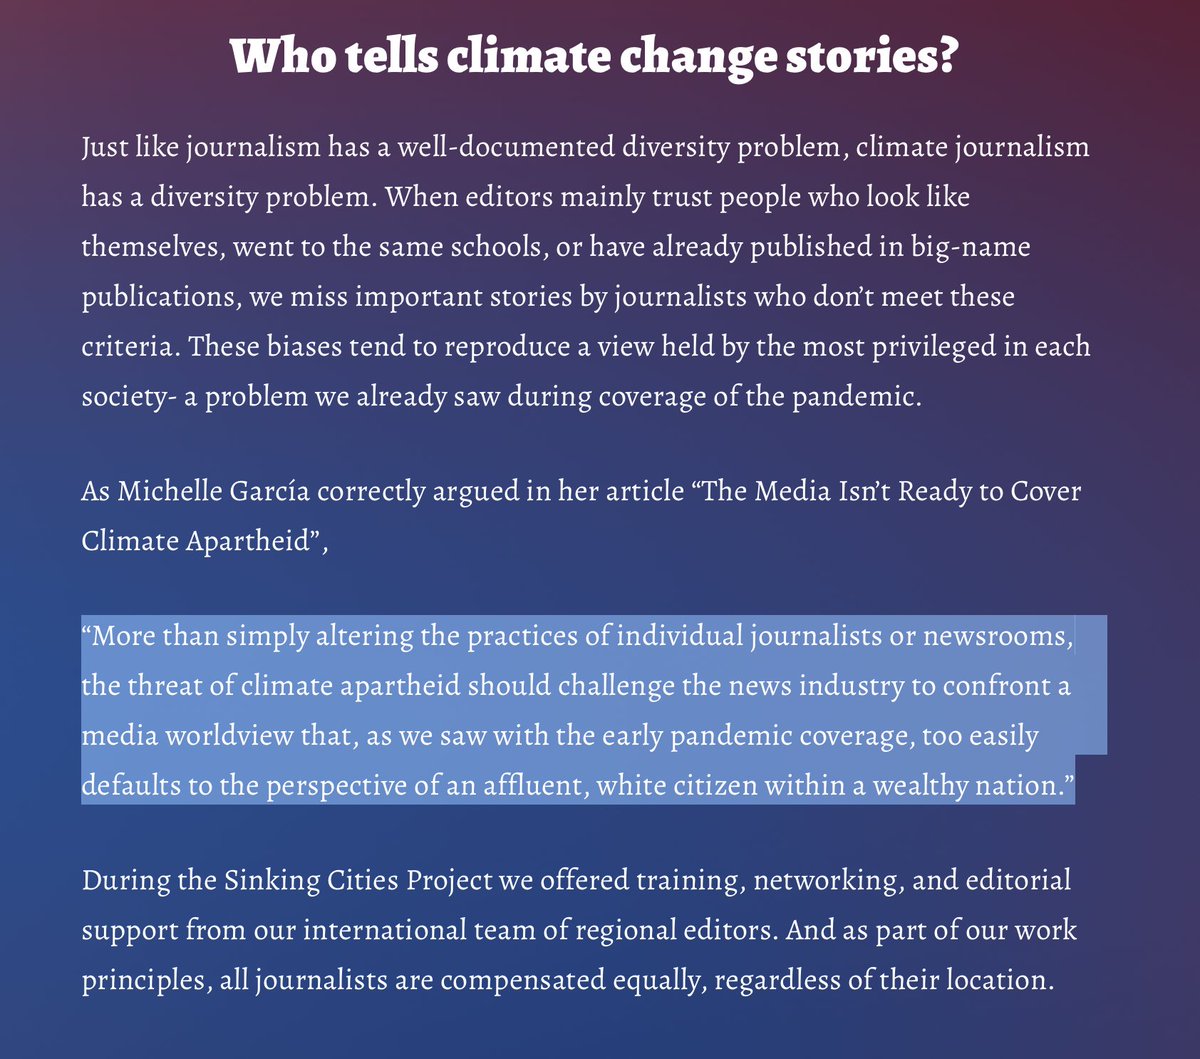 'These reports show that the response to the climate crisis is a social, historical and political phenomenon. Even on a city level, money and power obscure the picture of what needs to be done to ensure safety & justice for all. As journalists, we collaborate to clear the view.'